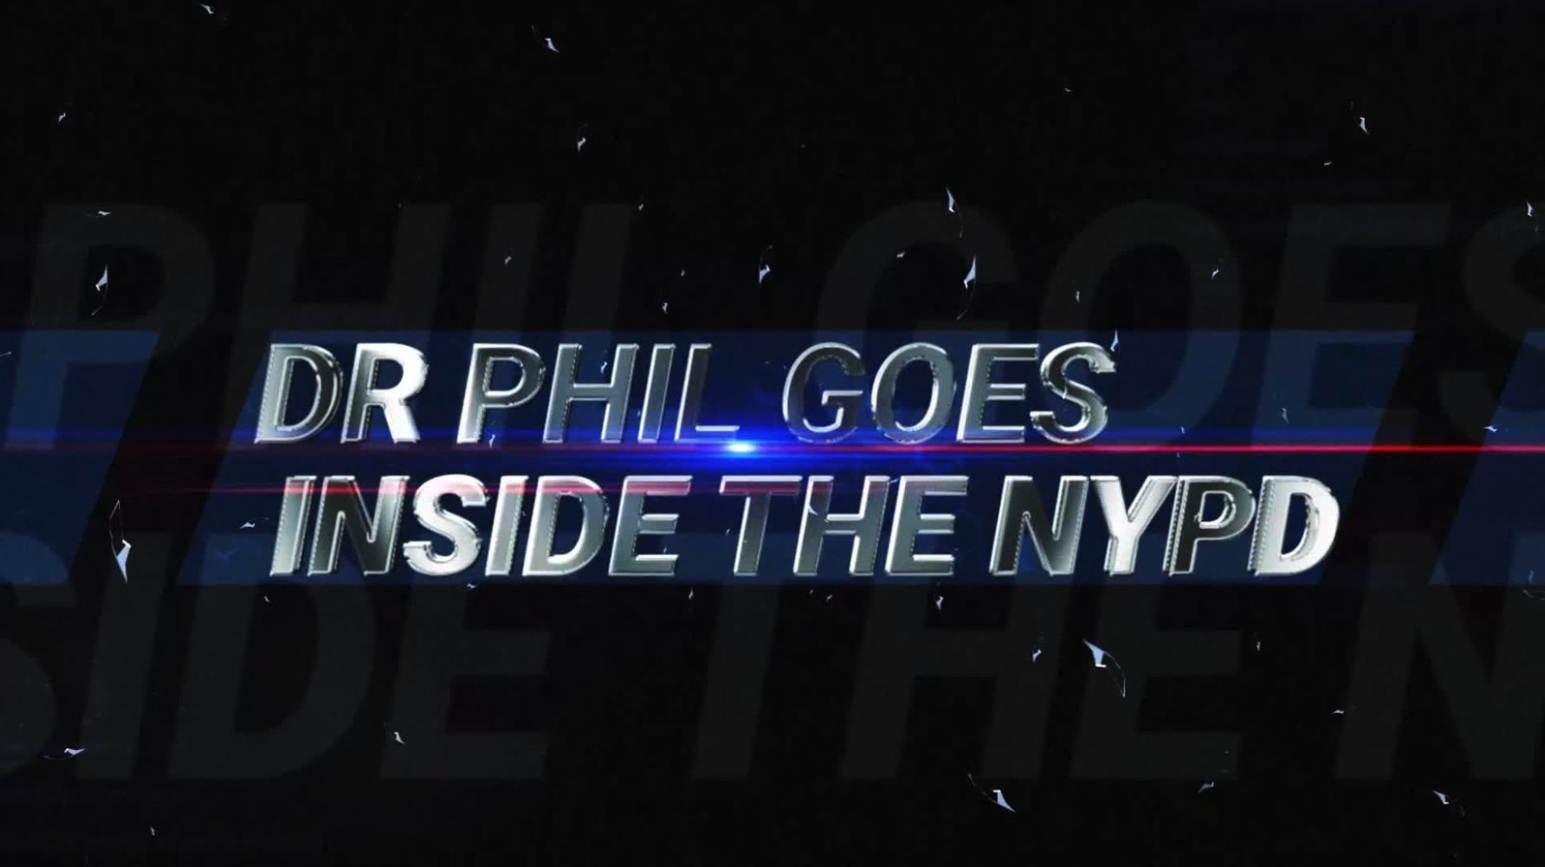 Dr. Phil Goes Inside the NYPD